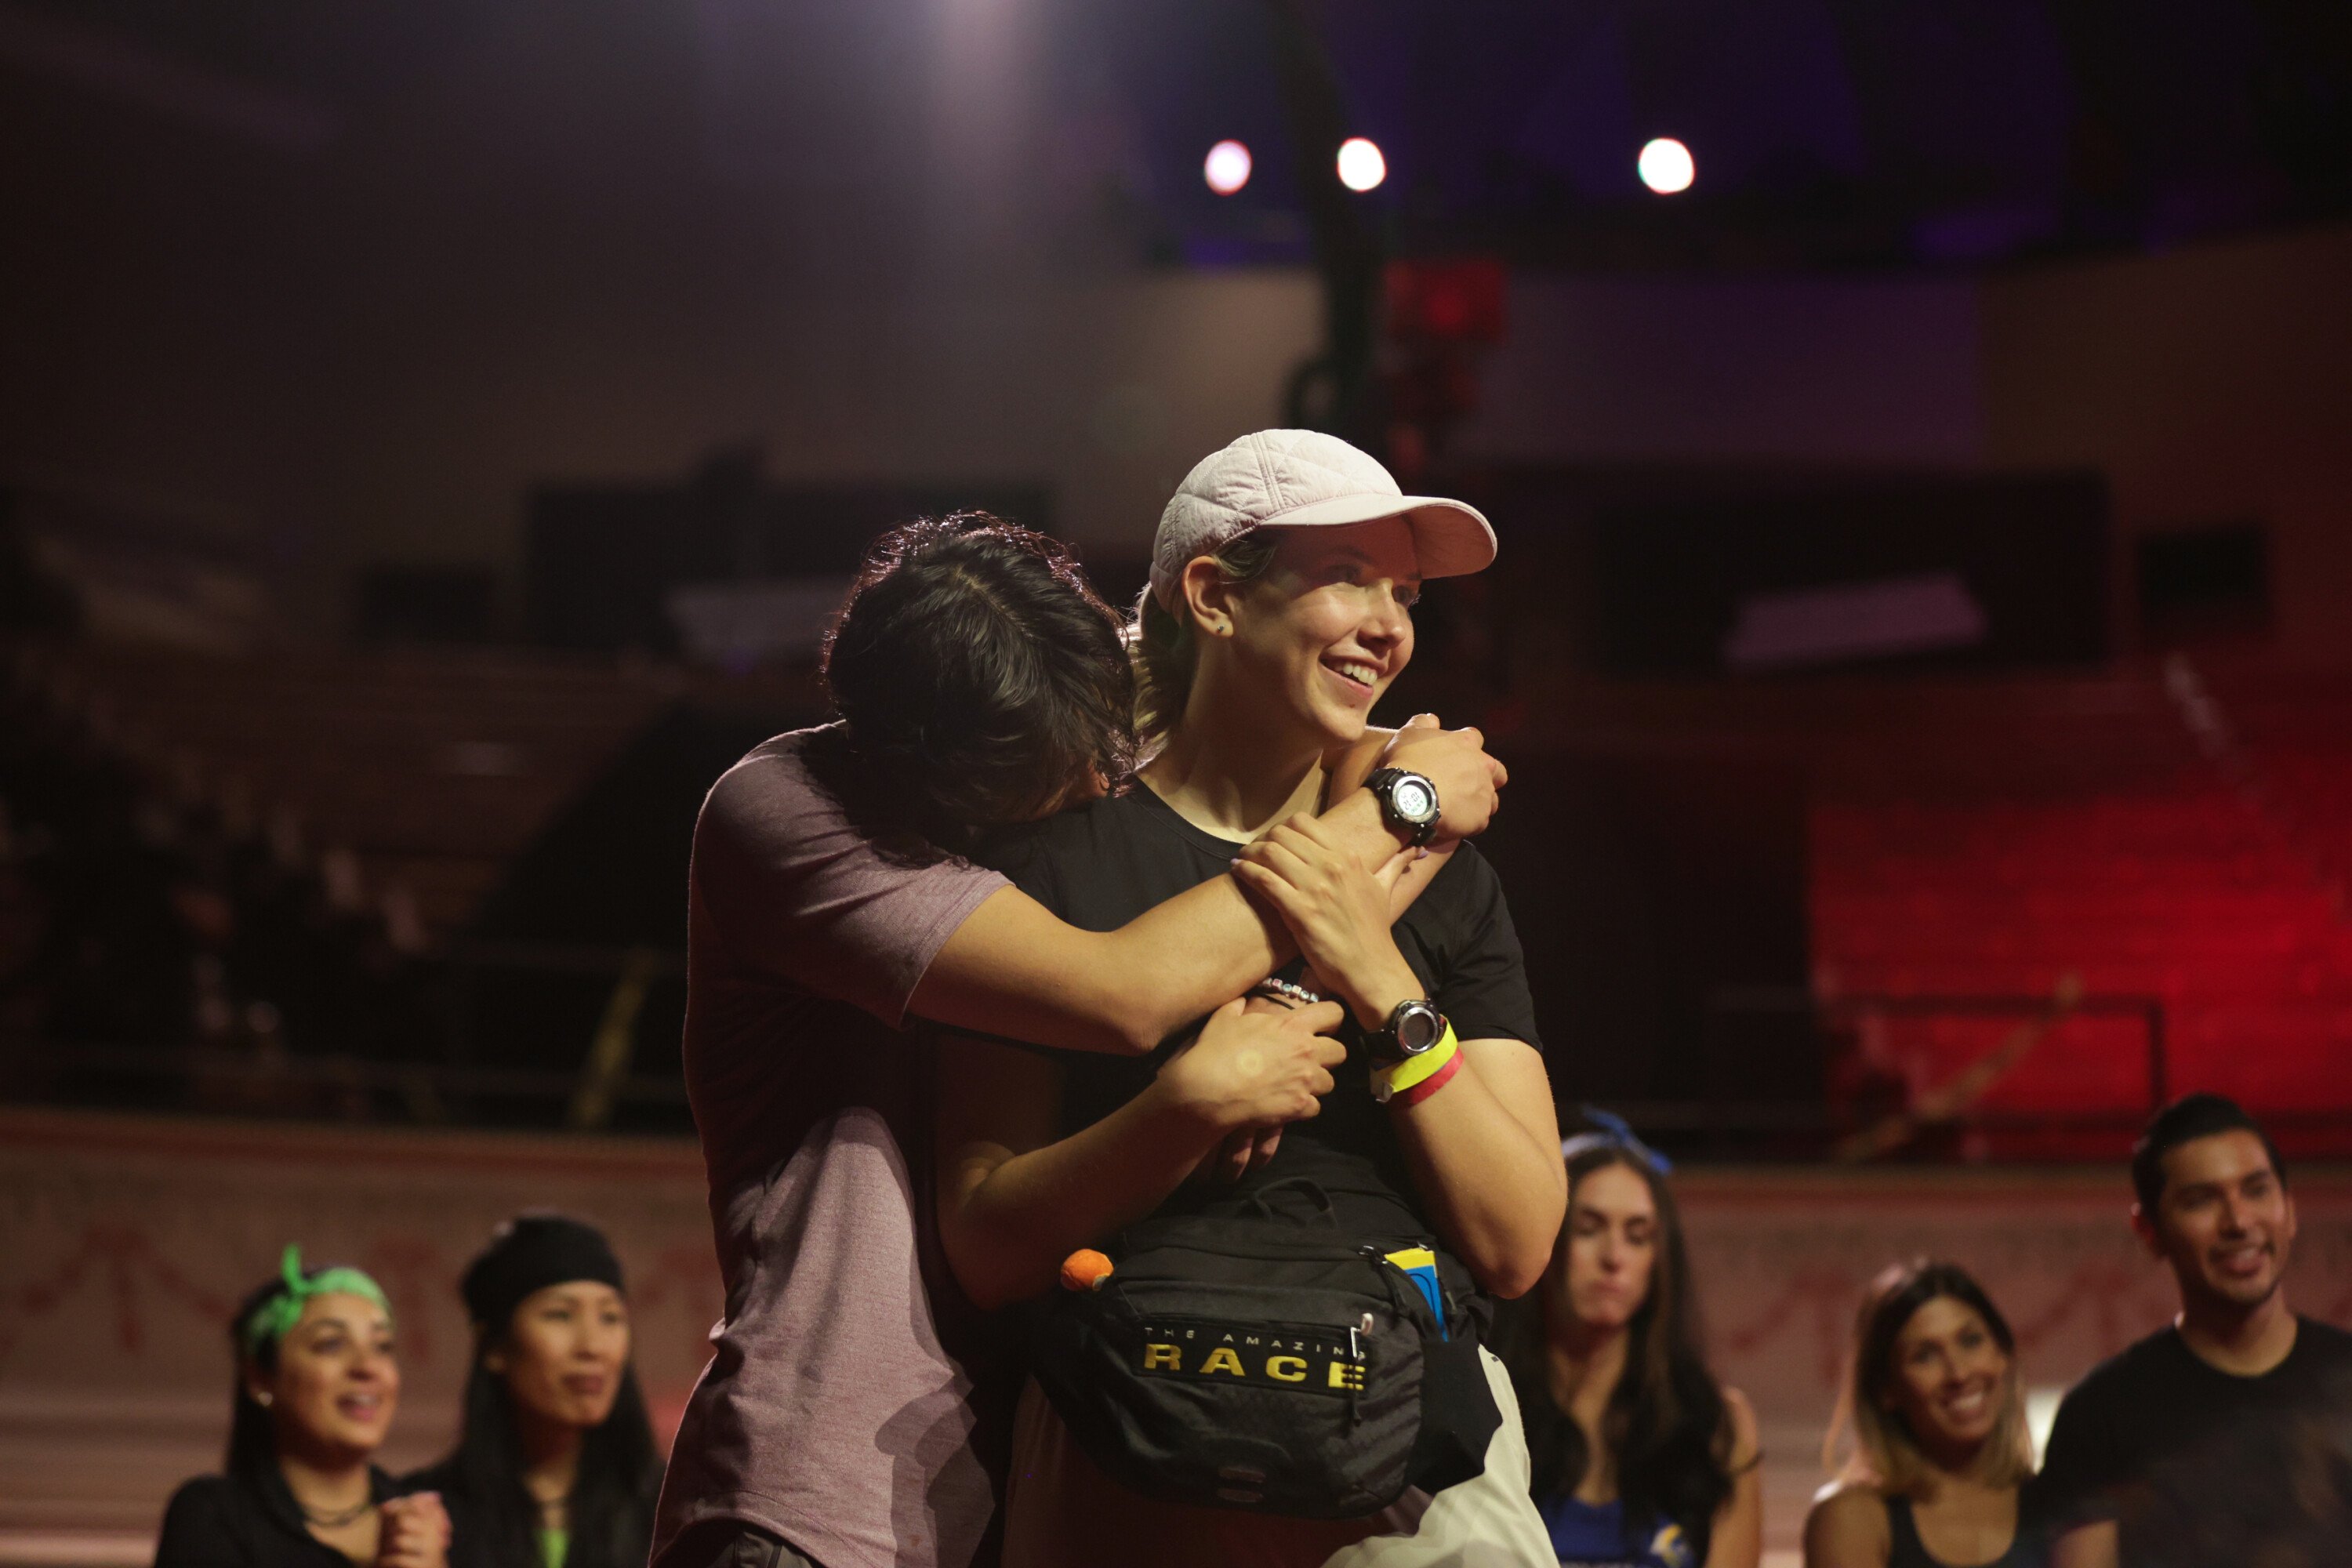 Derek Xiao and Claire Rehfuss, who won 'The Amazing Race' Season 34, hug after crossing the finish line. Derek wears a light purple shirt. Claire wears a black shirt and light pink baseball hat.